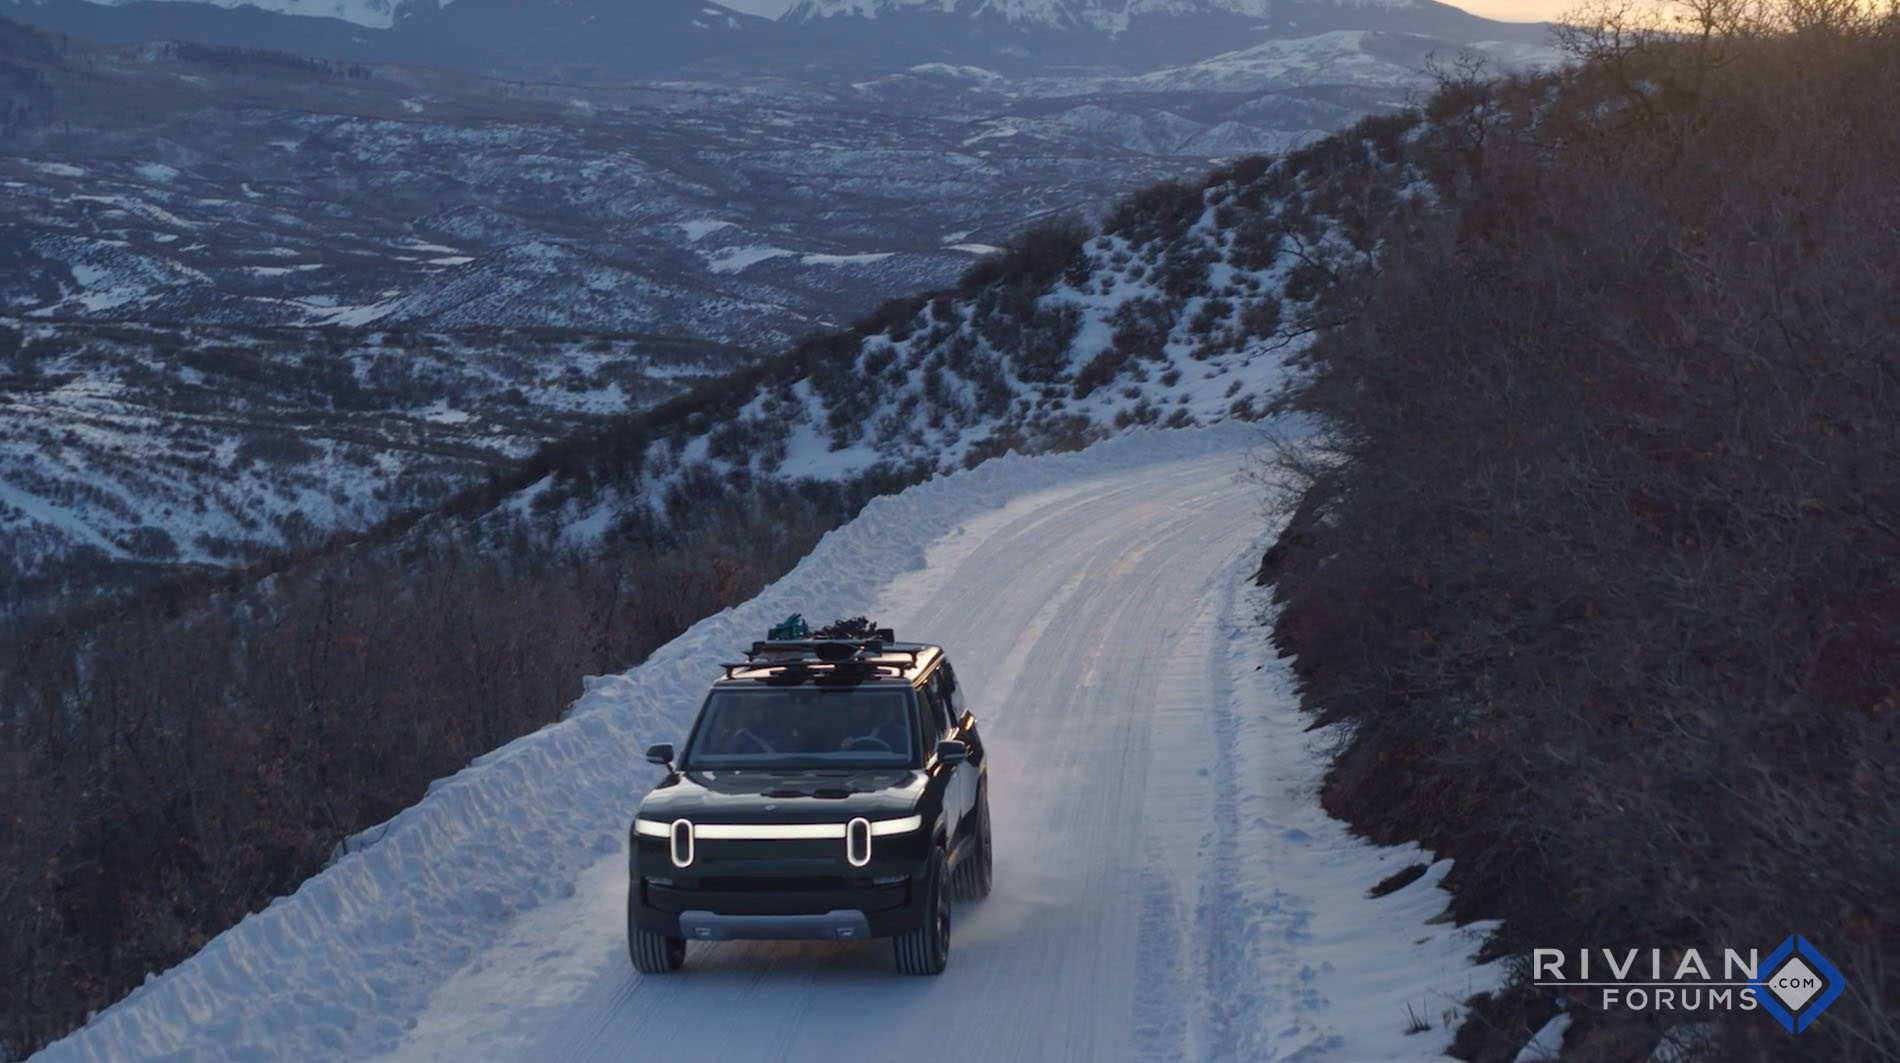 Rivian R1T R1S R1S looking more and more like Range Rover Rivian-R1S-R1T-Snowboarding-Adventure6